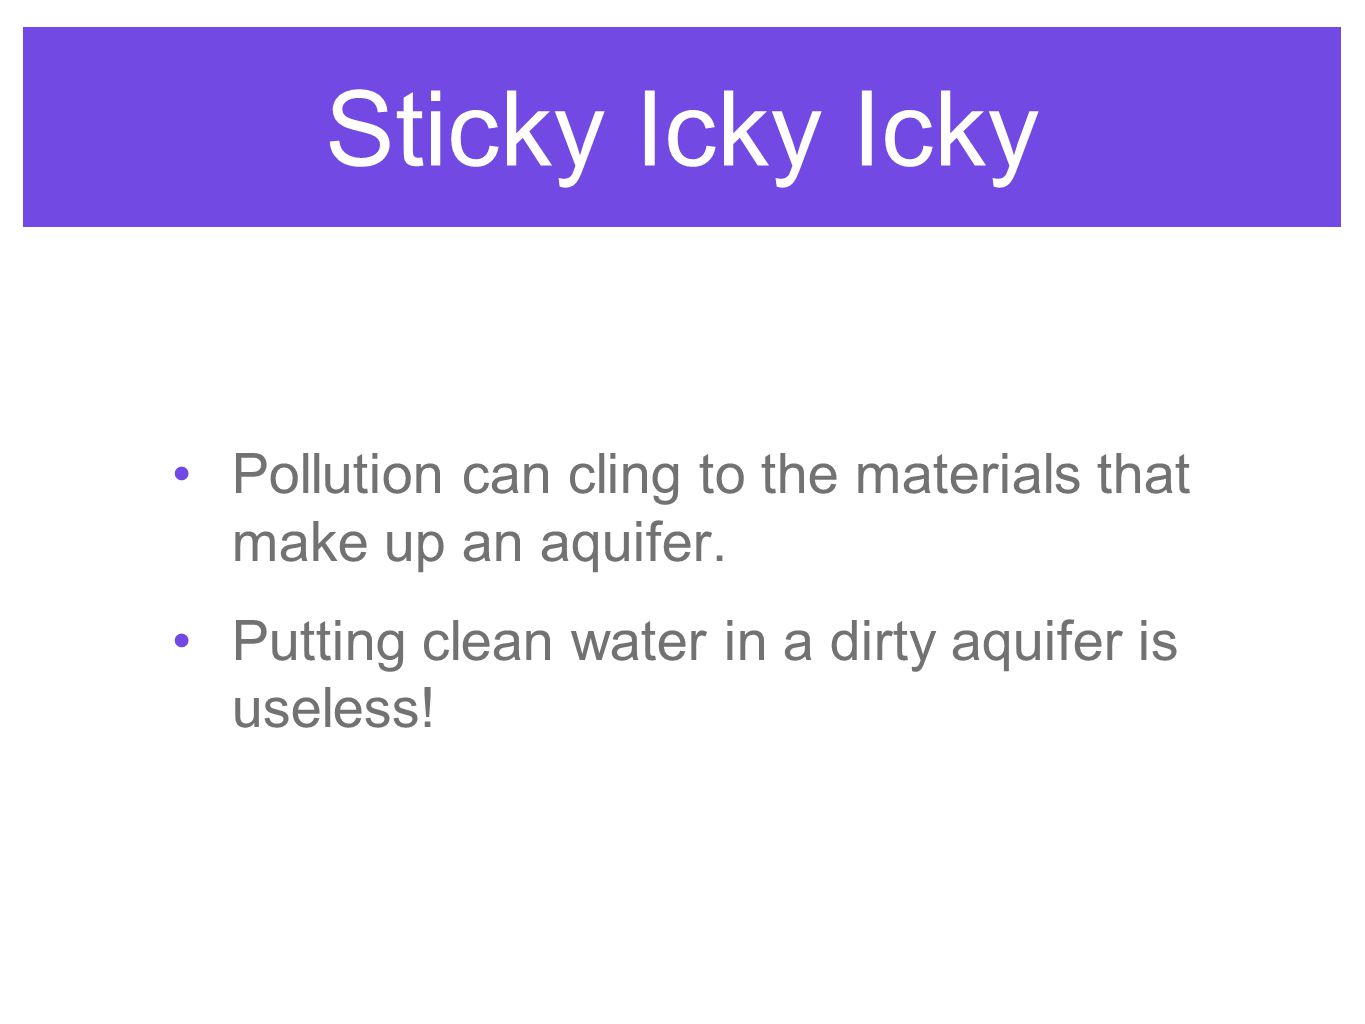 Sticky Icky Icky Pollution can cling to the materials that make up an aquifer.